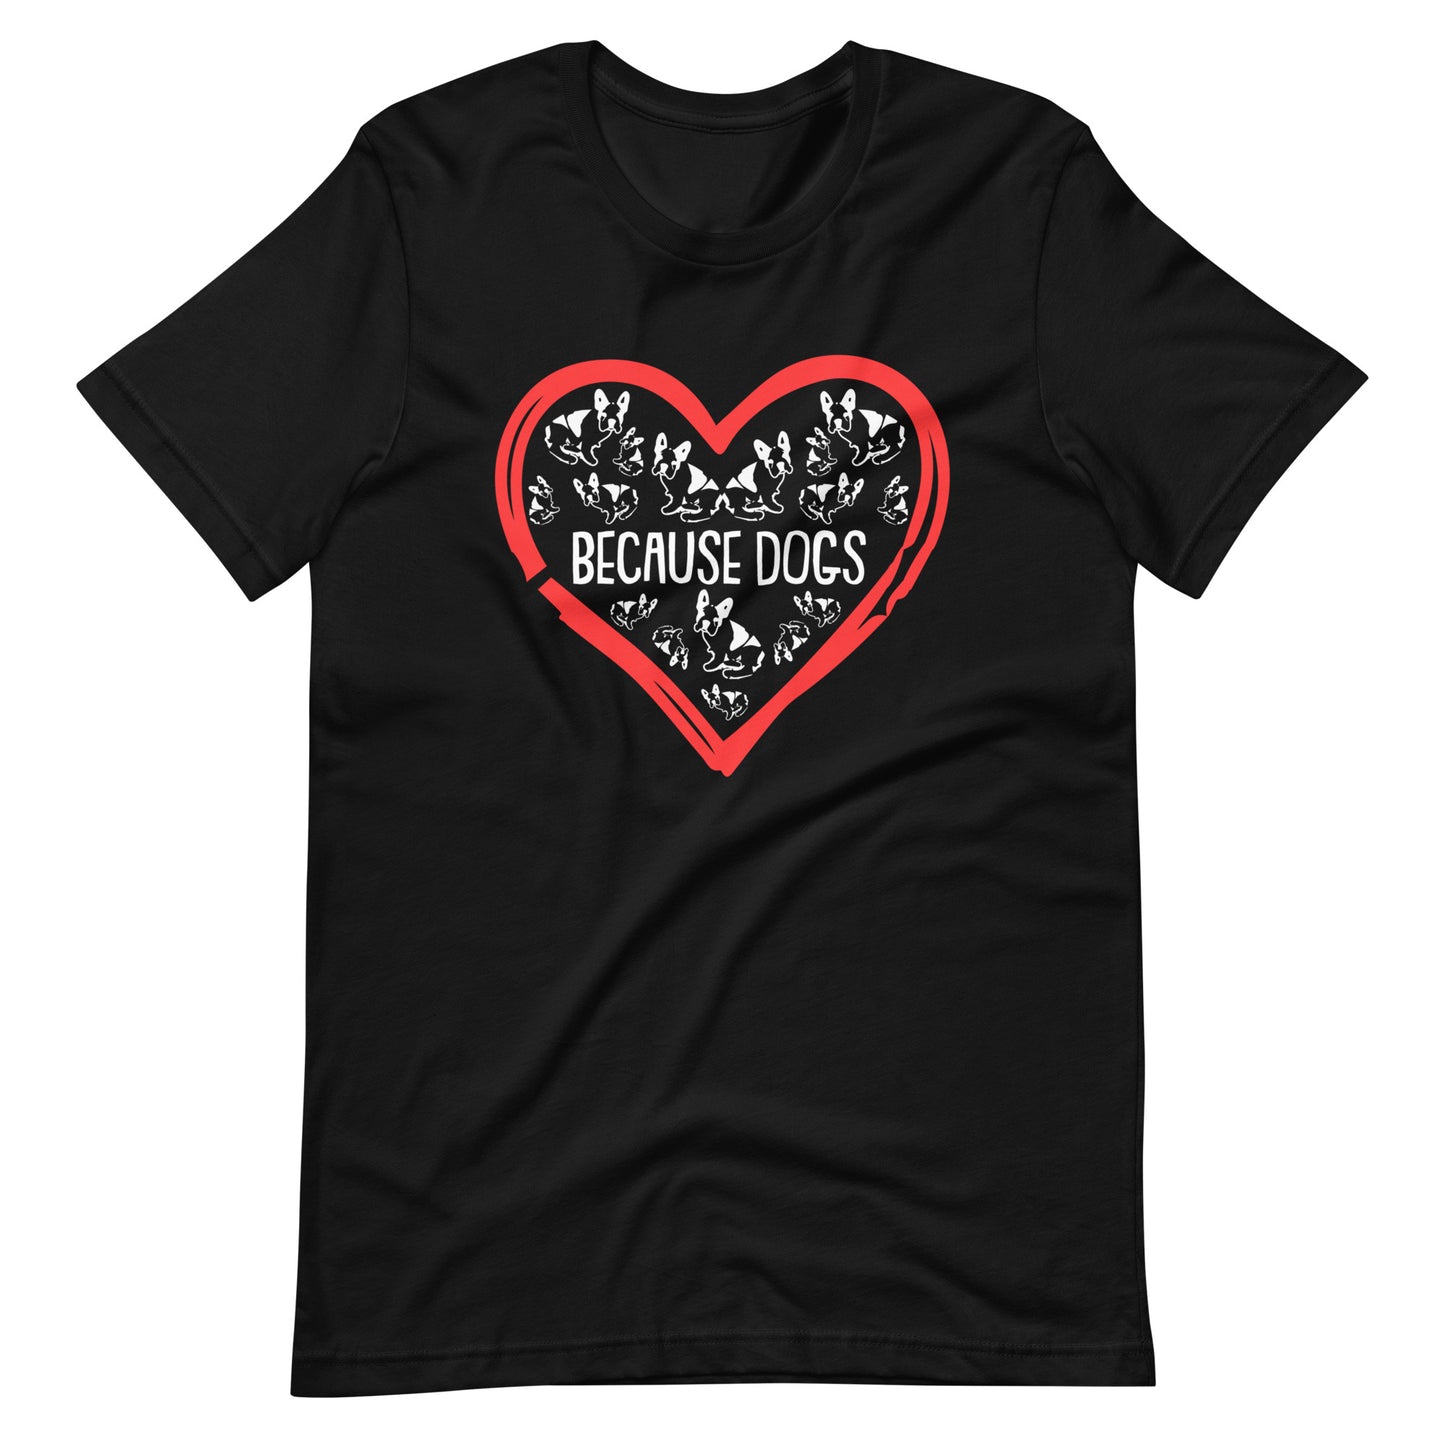 Because Dogs in Heart T-Shirt